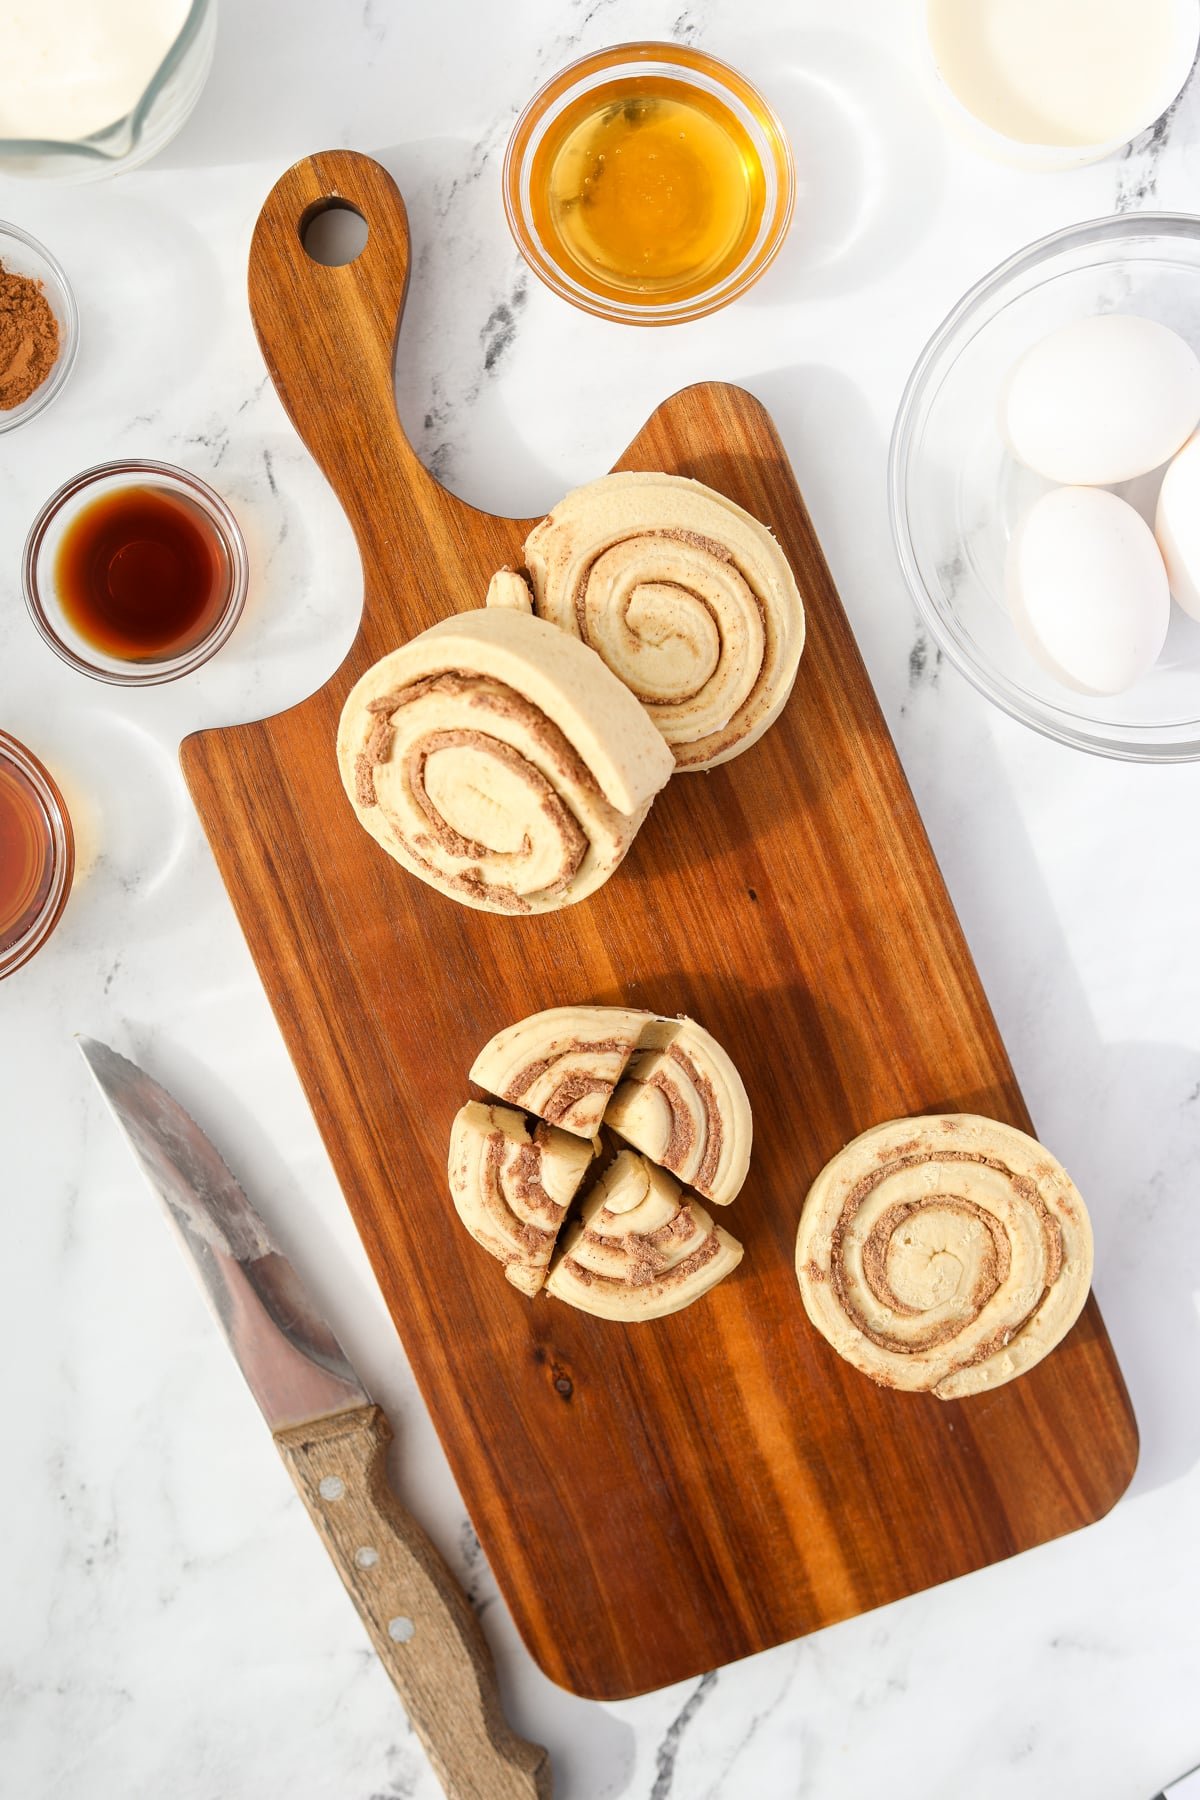 A cutting board with cinnamon rolls being sliced into quarters.